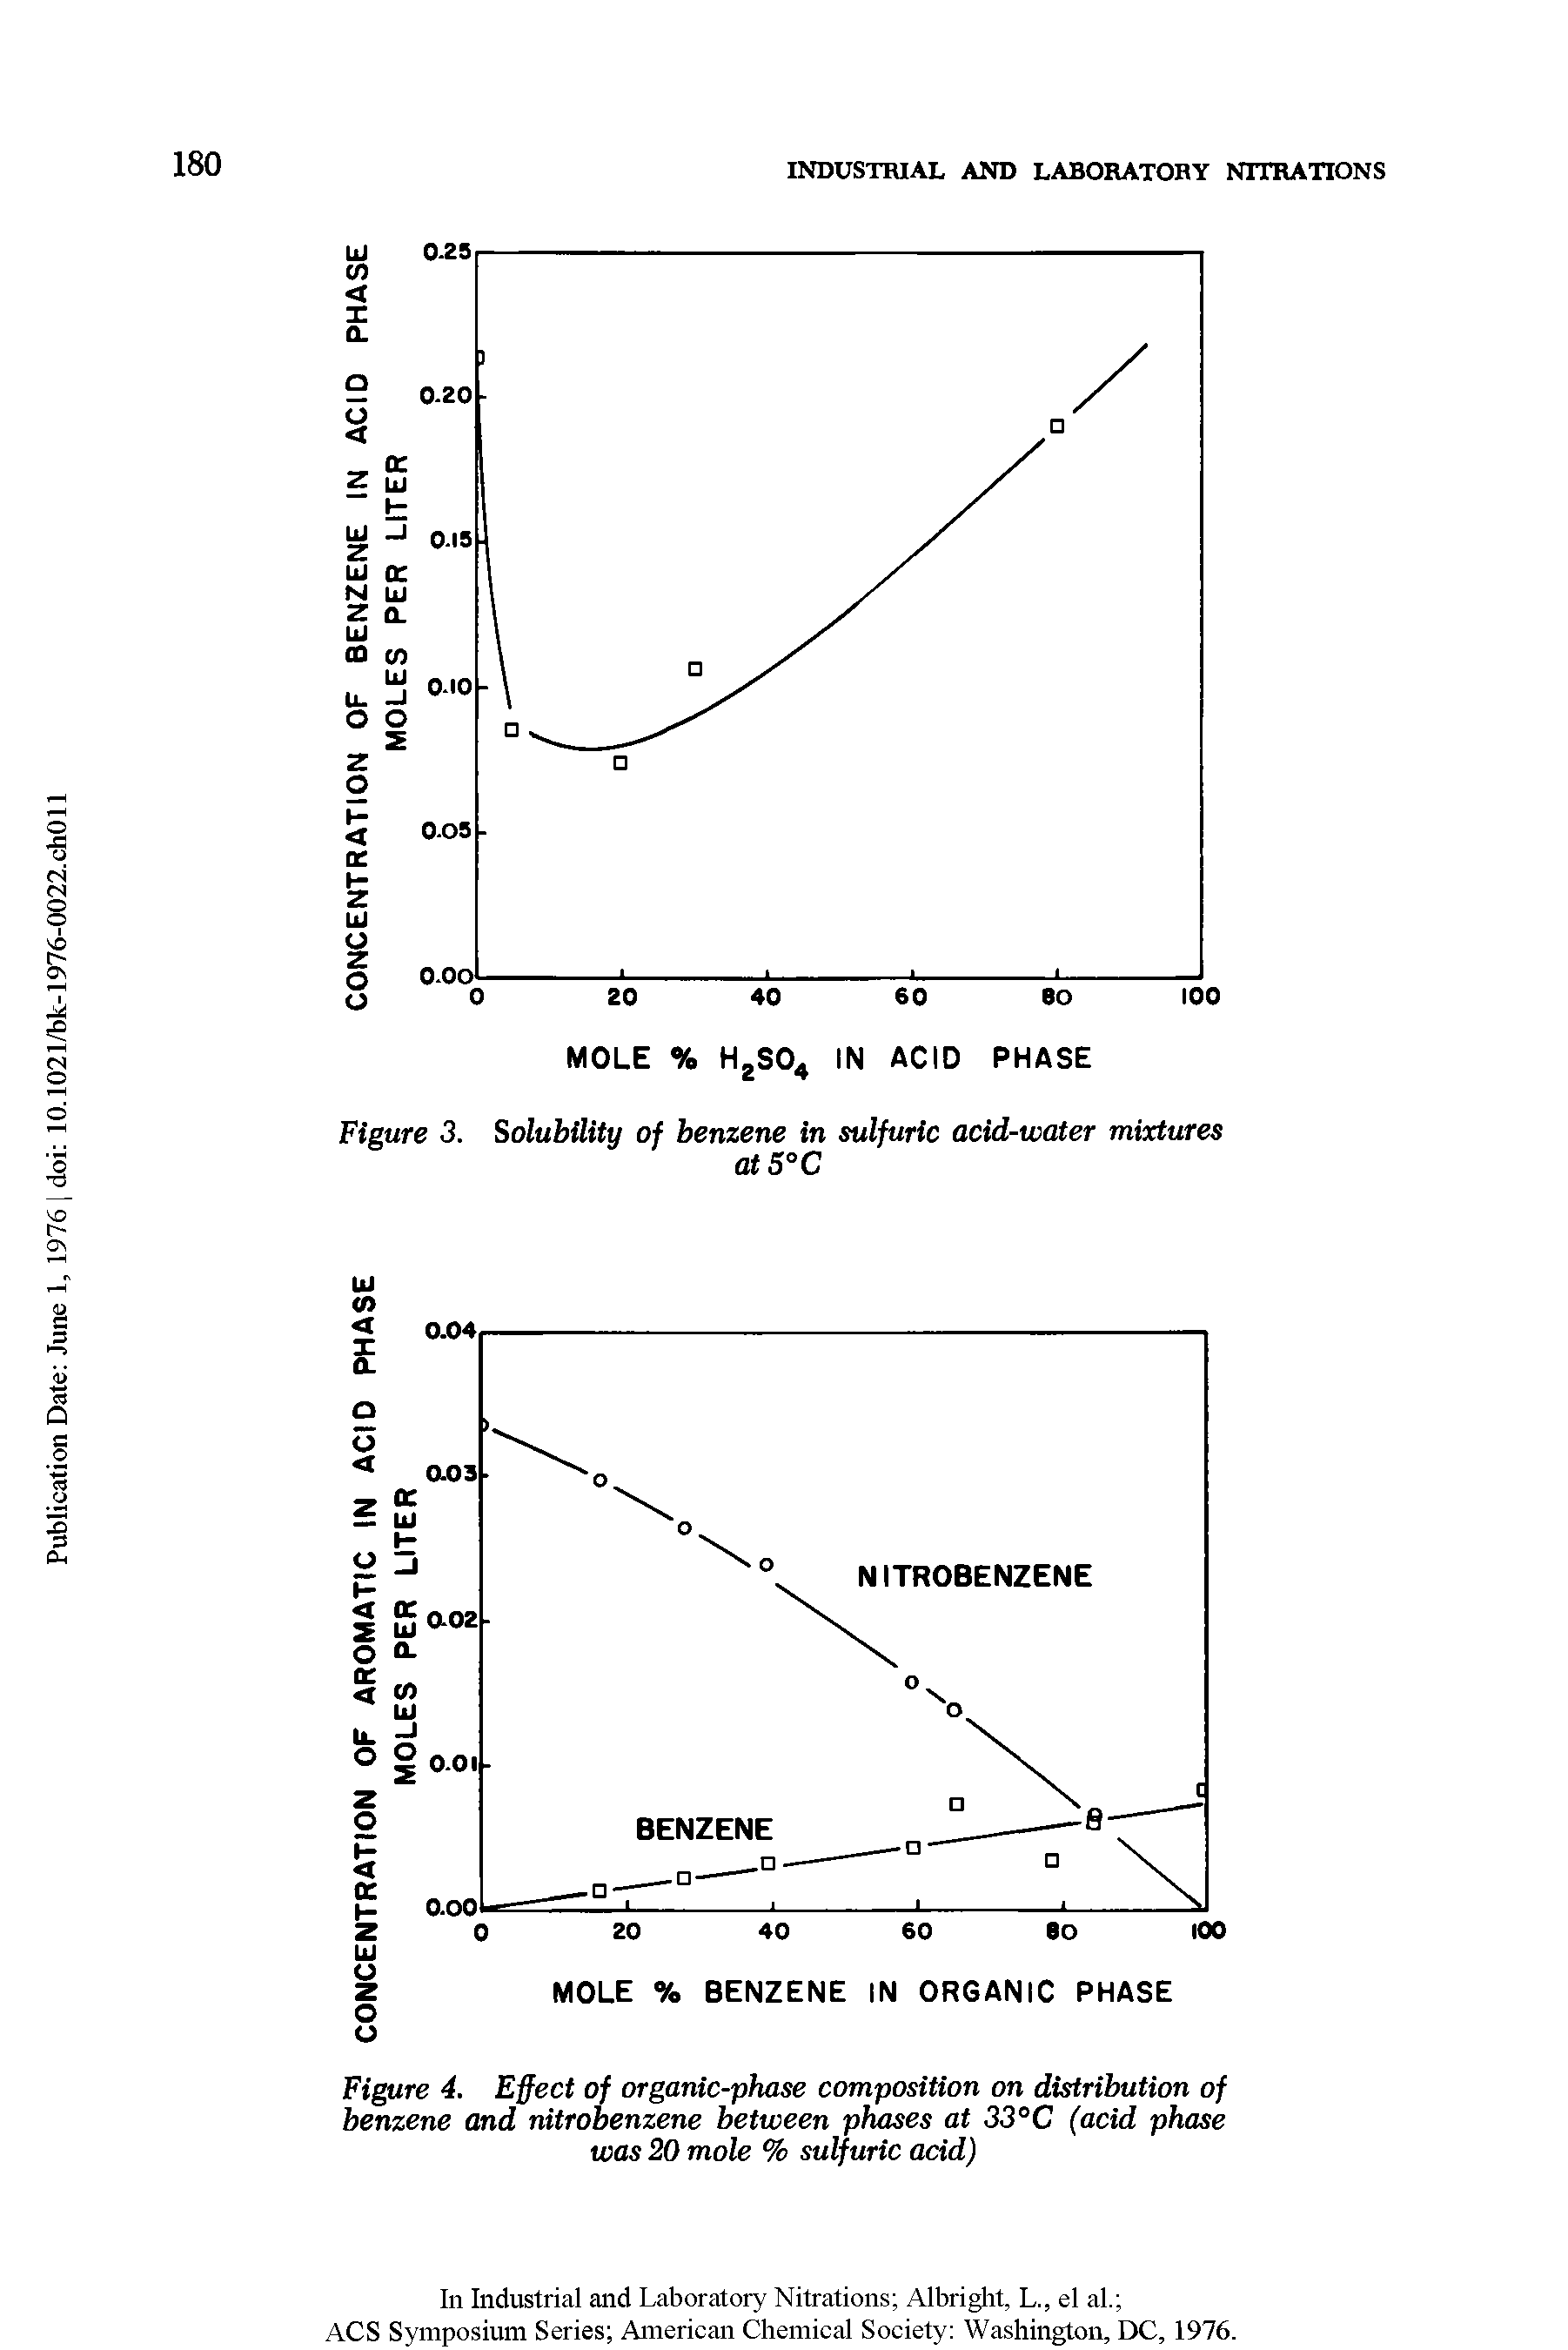 Figure 4. Effect of organic-phase composition on distribution of benzene and nitrobenzene between phases at 33°C (acid phase was 20 mole % sulfuric add)...